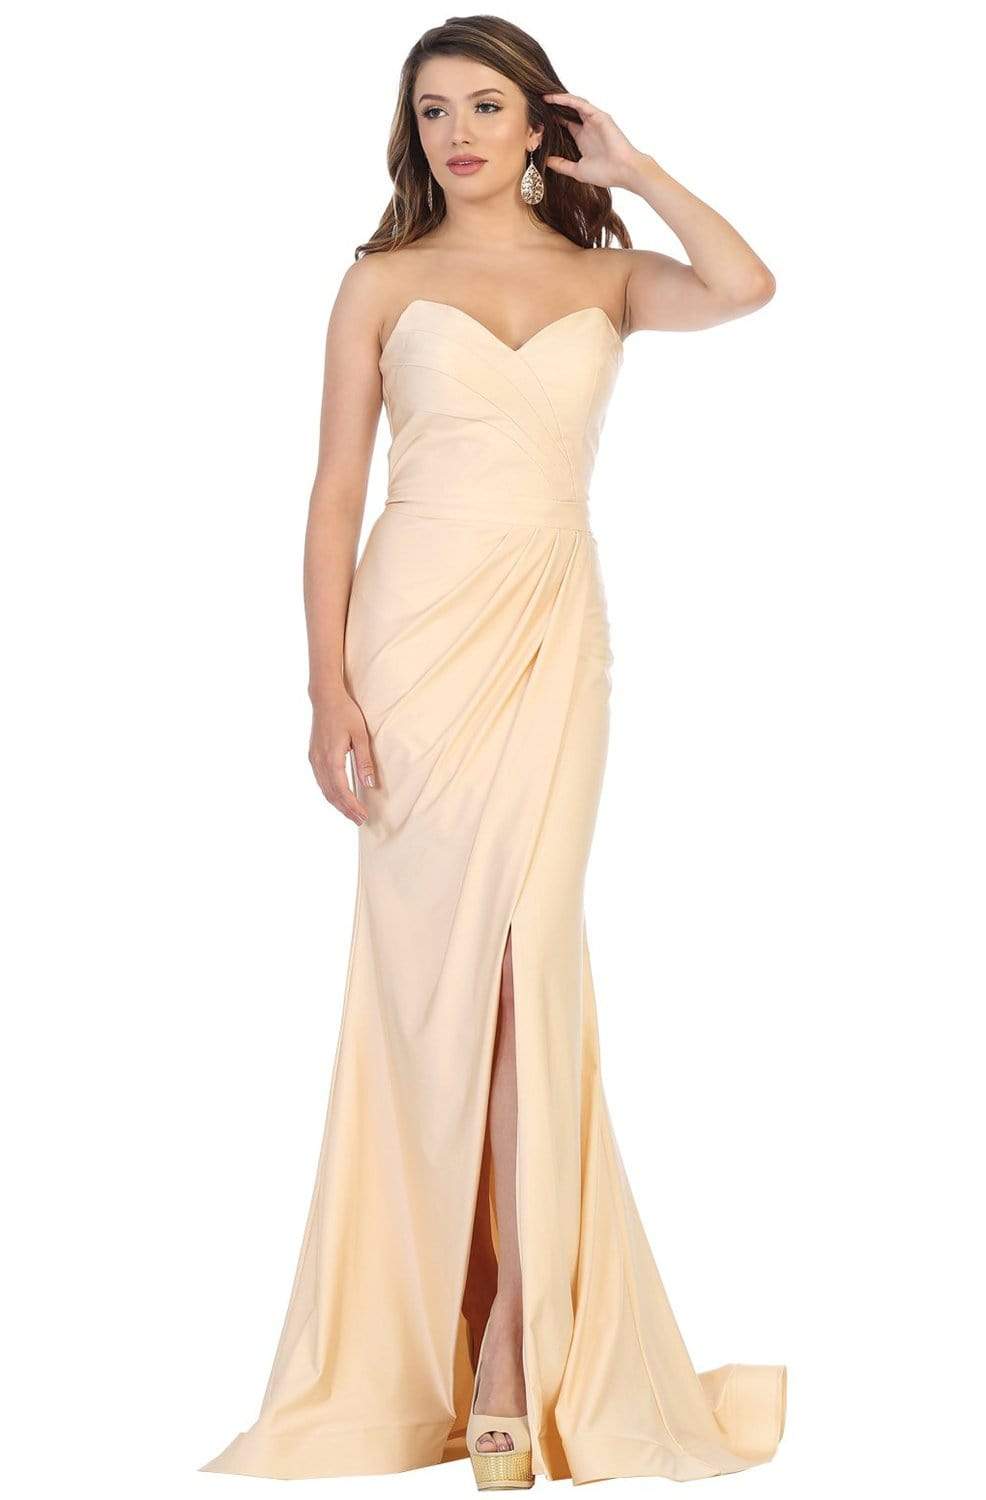 May Queen - MQ1718 Strapless Sweetheart Draping High Slit Dress Evening Dresses 4 / Champagne